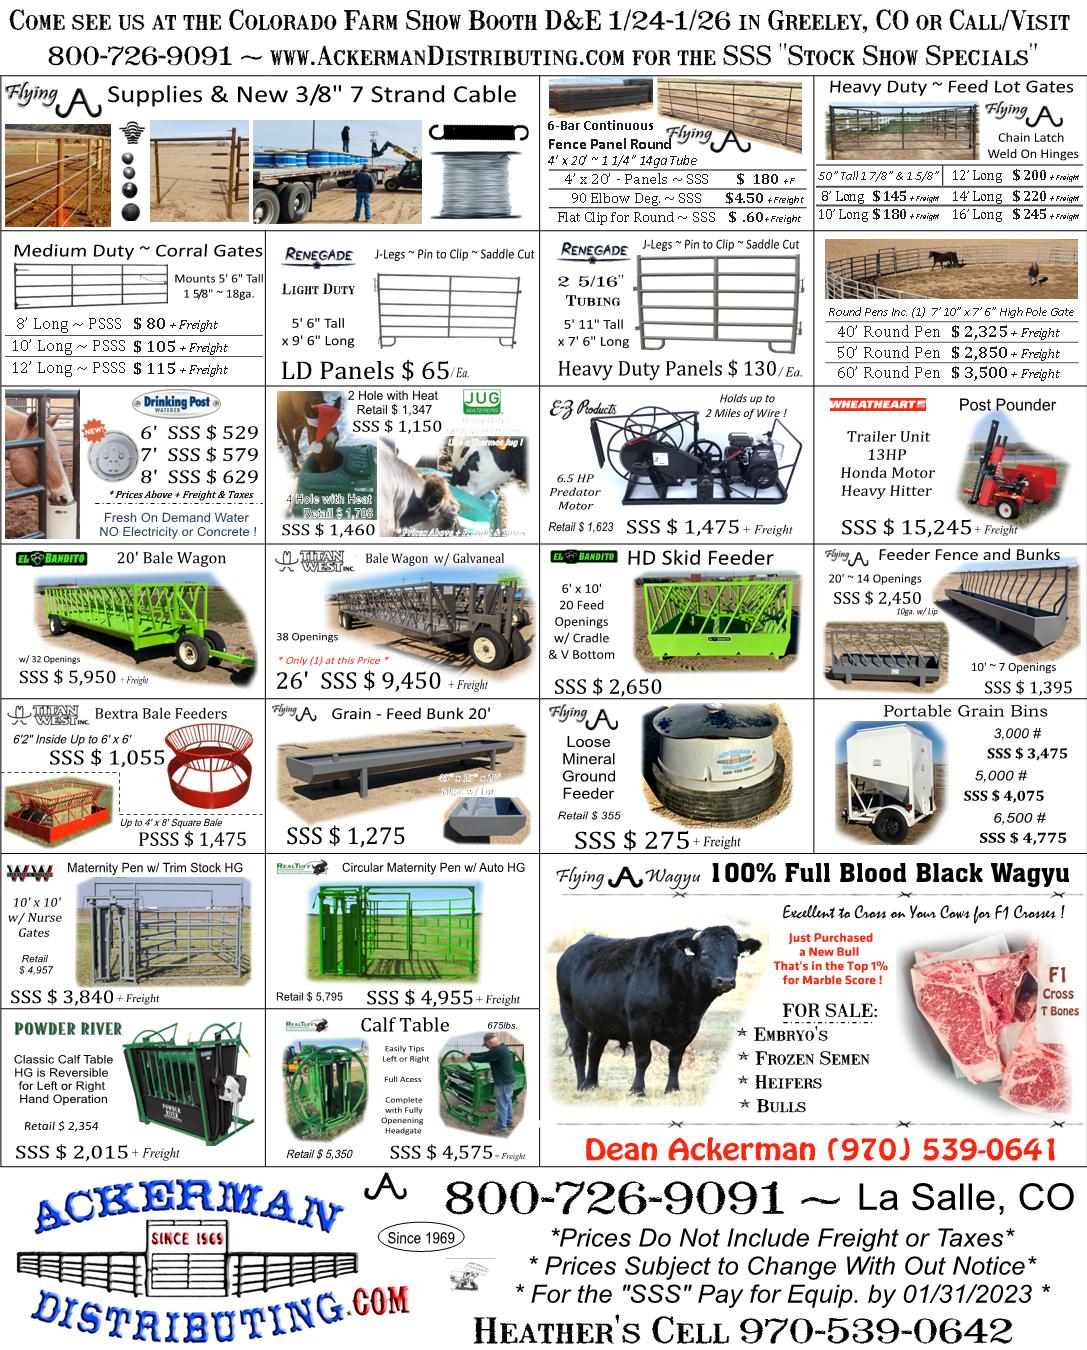 2022 11 30 PSSS Fence Post Full Page Ad